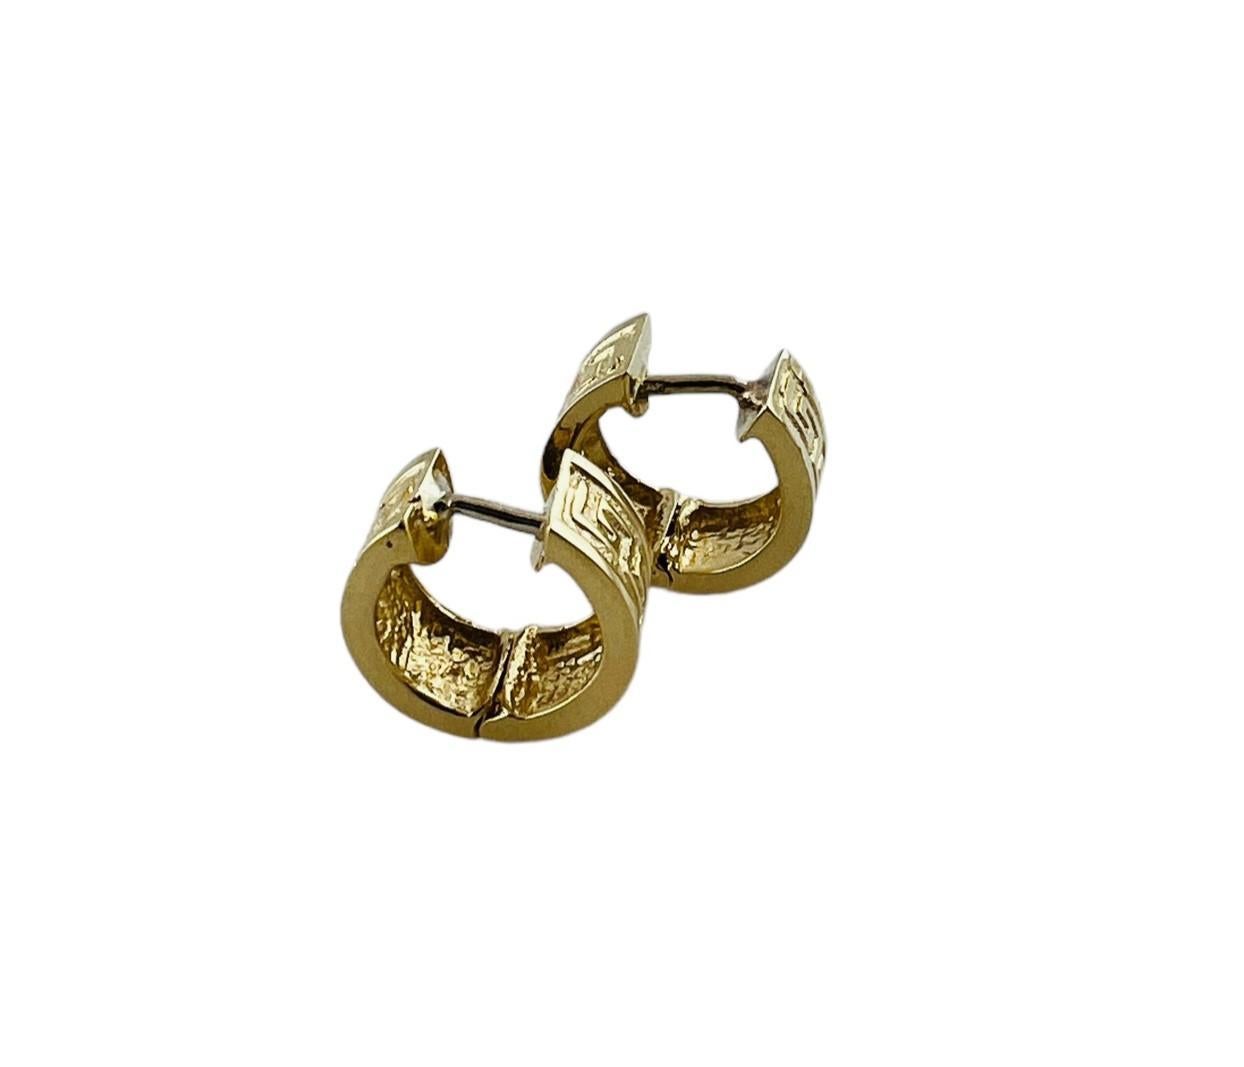 14K Yellow Gold Huggie Hoop Earrings Aztec Design -

These stylish hoops add a touch of understated glamour to your outfits.

Size:  12.5 mm X 13.72mm X 6.51 mm

Weight:  2.8 dwt. /  4.37 gr.

Marked: 14K 

Very good condition, professionally